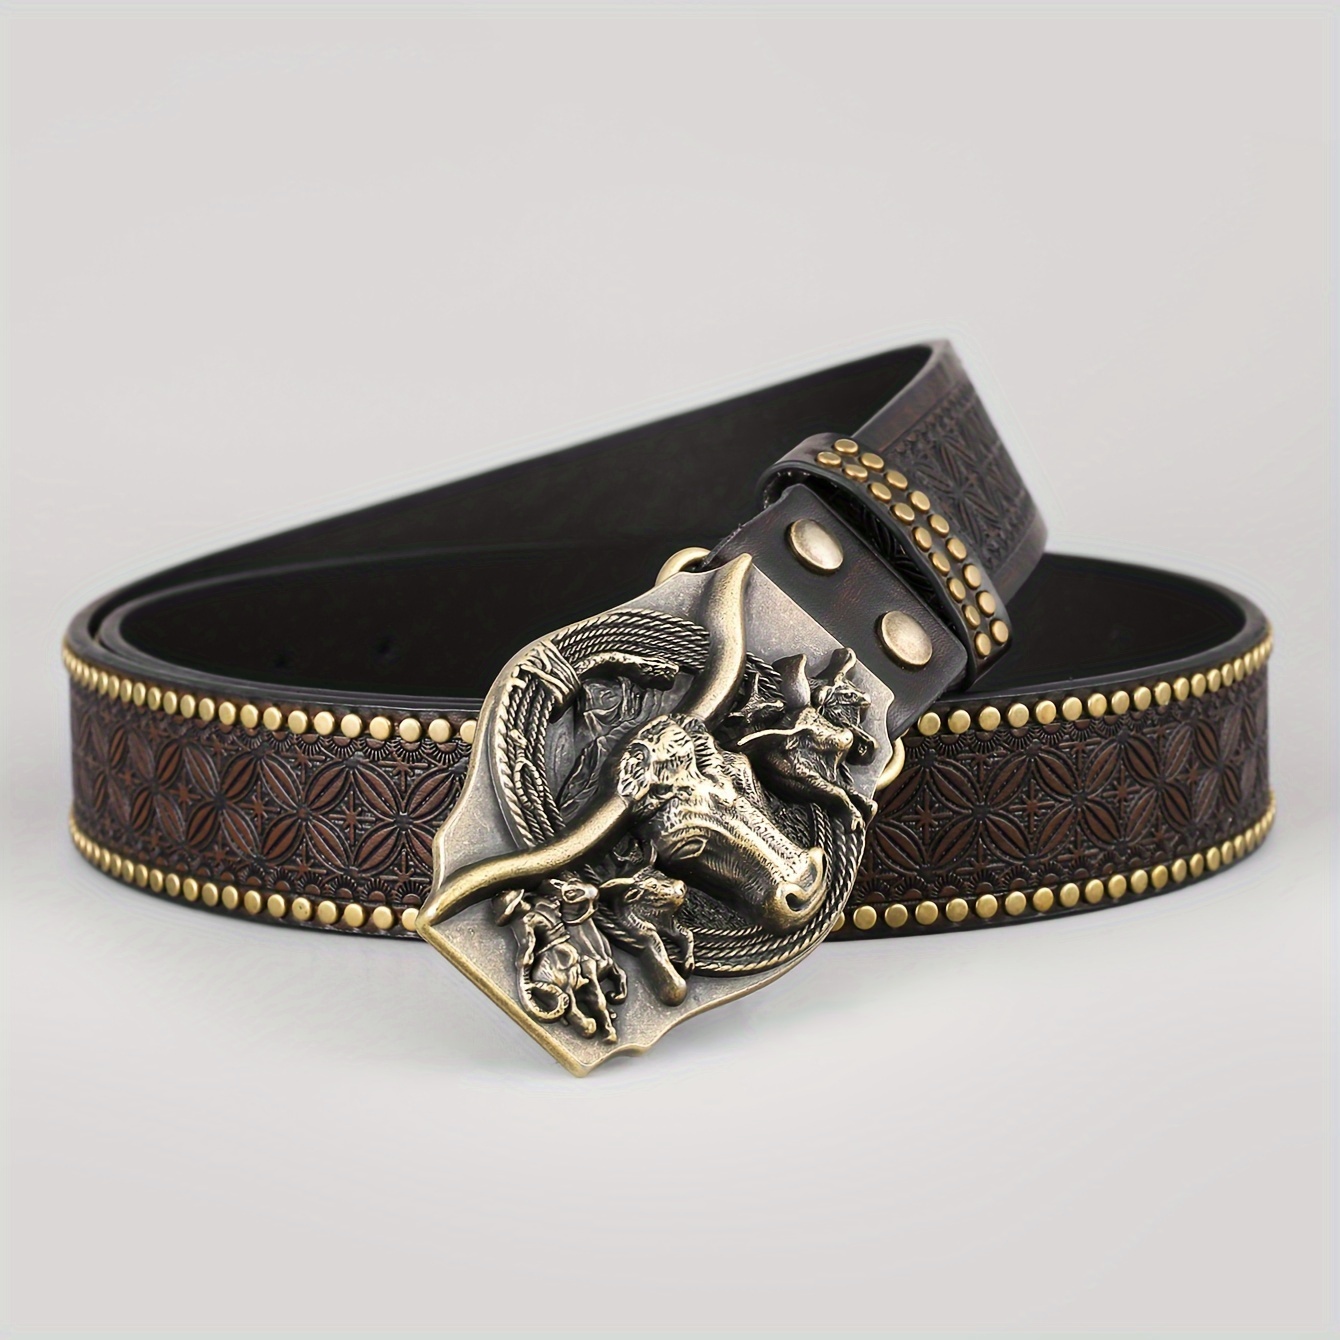 

1pc Stay Fashion With Western Style Pu Belt With Cattle Patterned Alloy Buckle For Men, Perfect For Daily Wear And Gift!